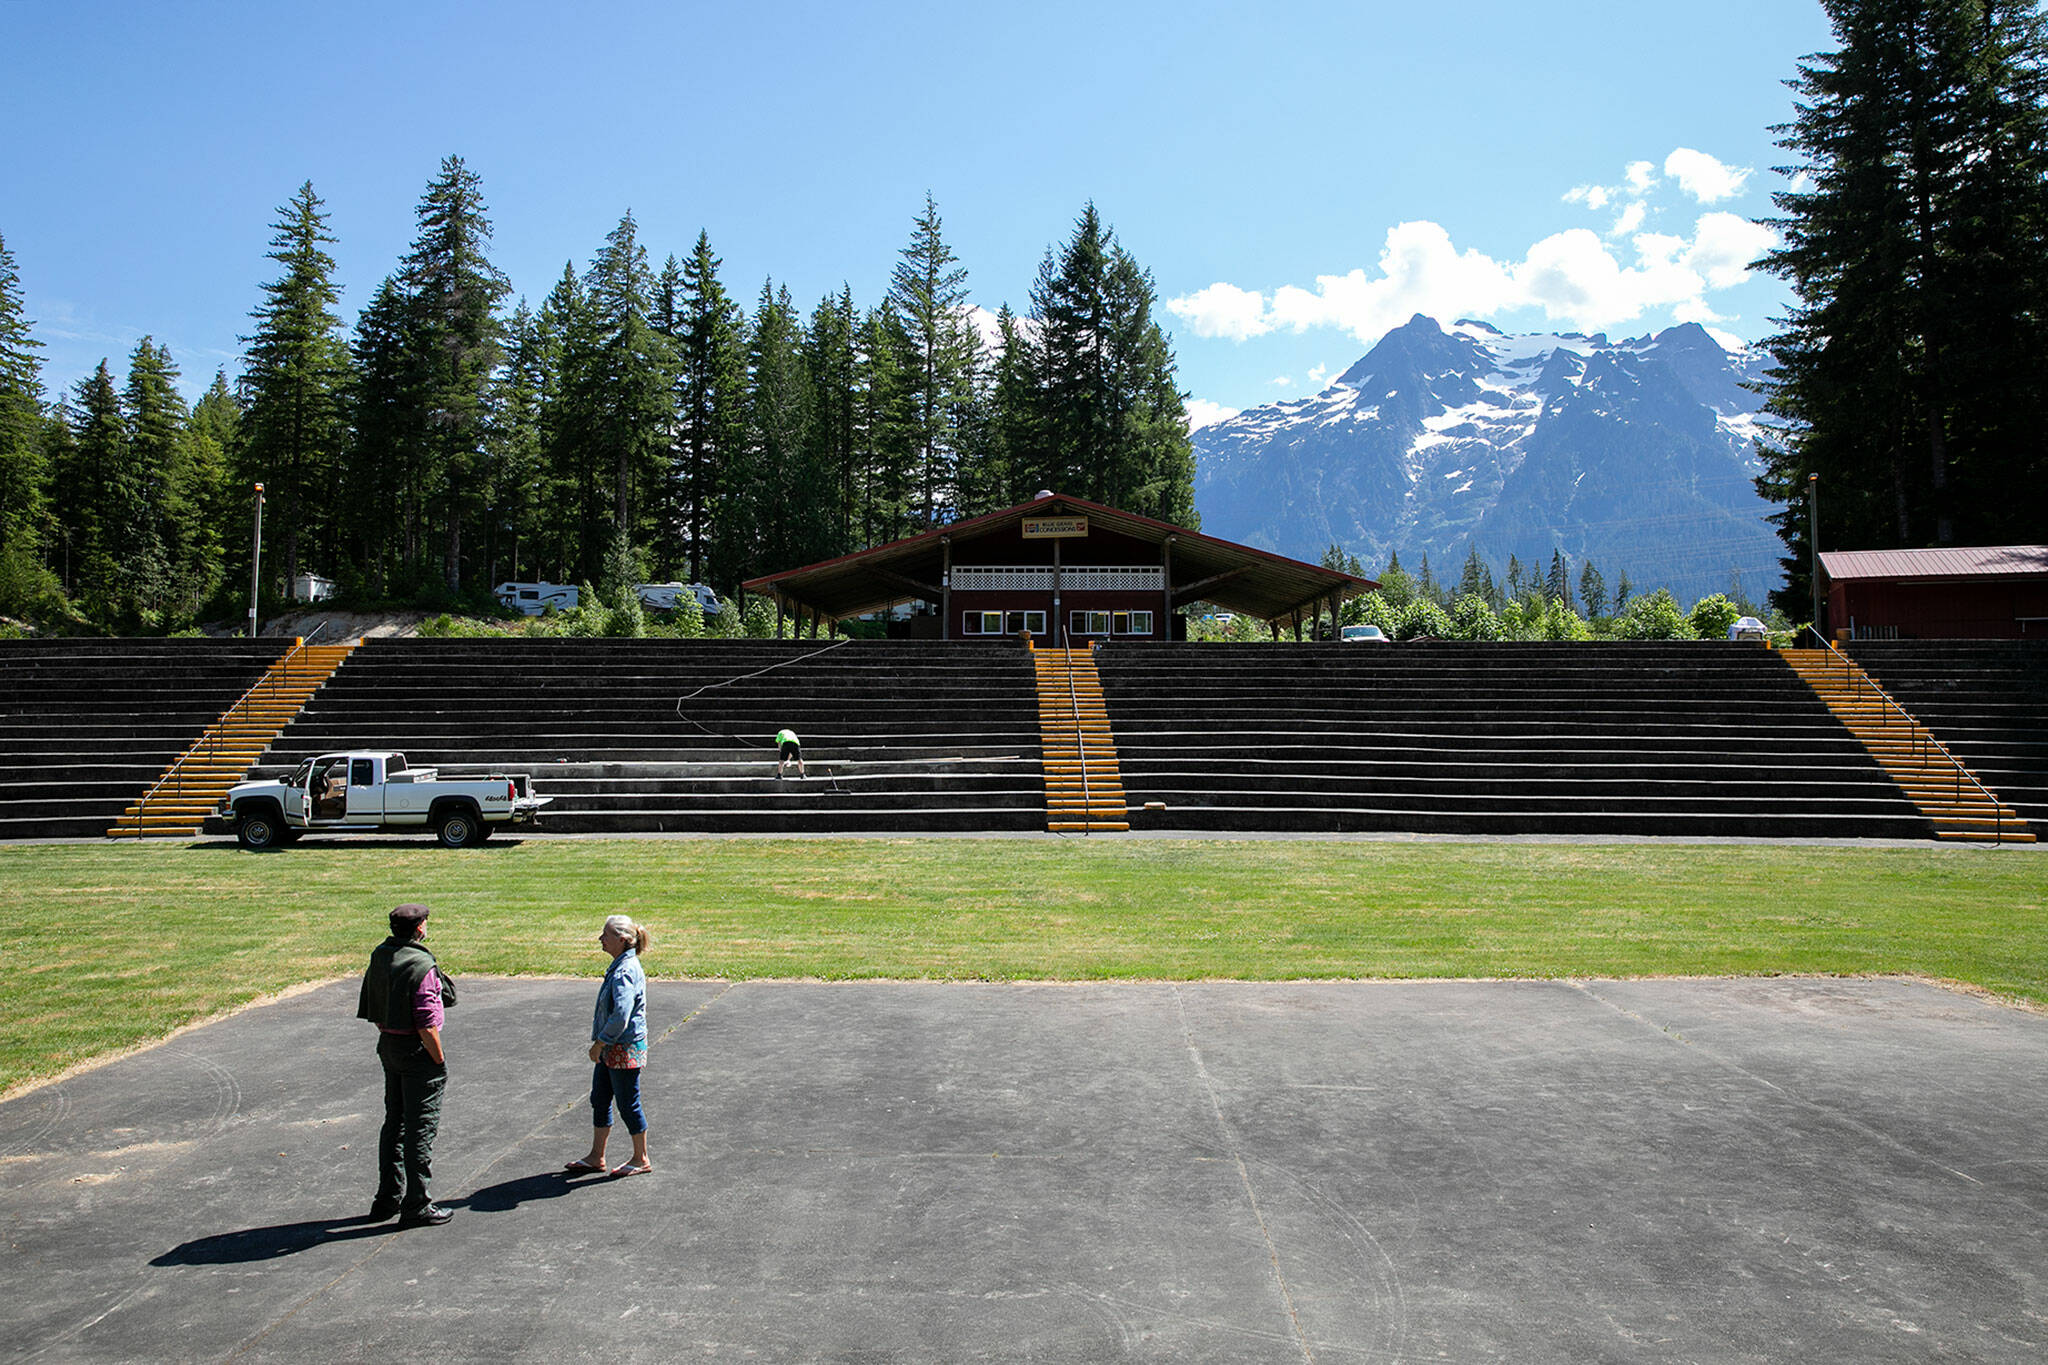 Two early arrivals walk around the amphitheater and take in the view on Wednesday, at Darrington Bluegrass Music Park in Darrington. (Ryan Berry / The Herald)